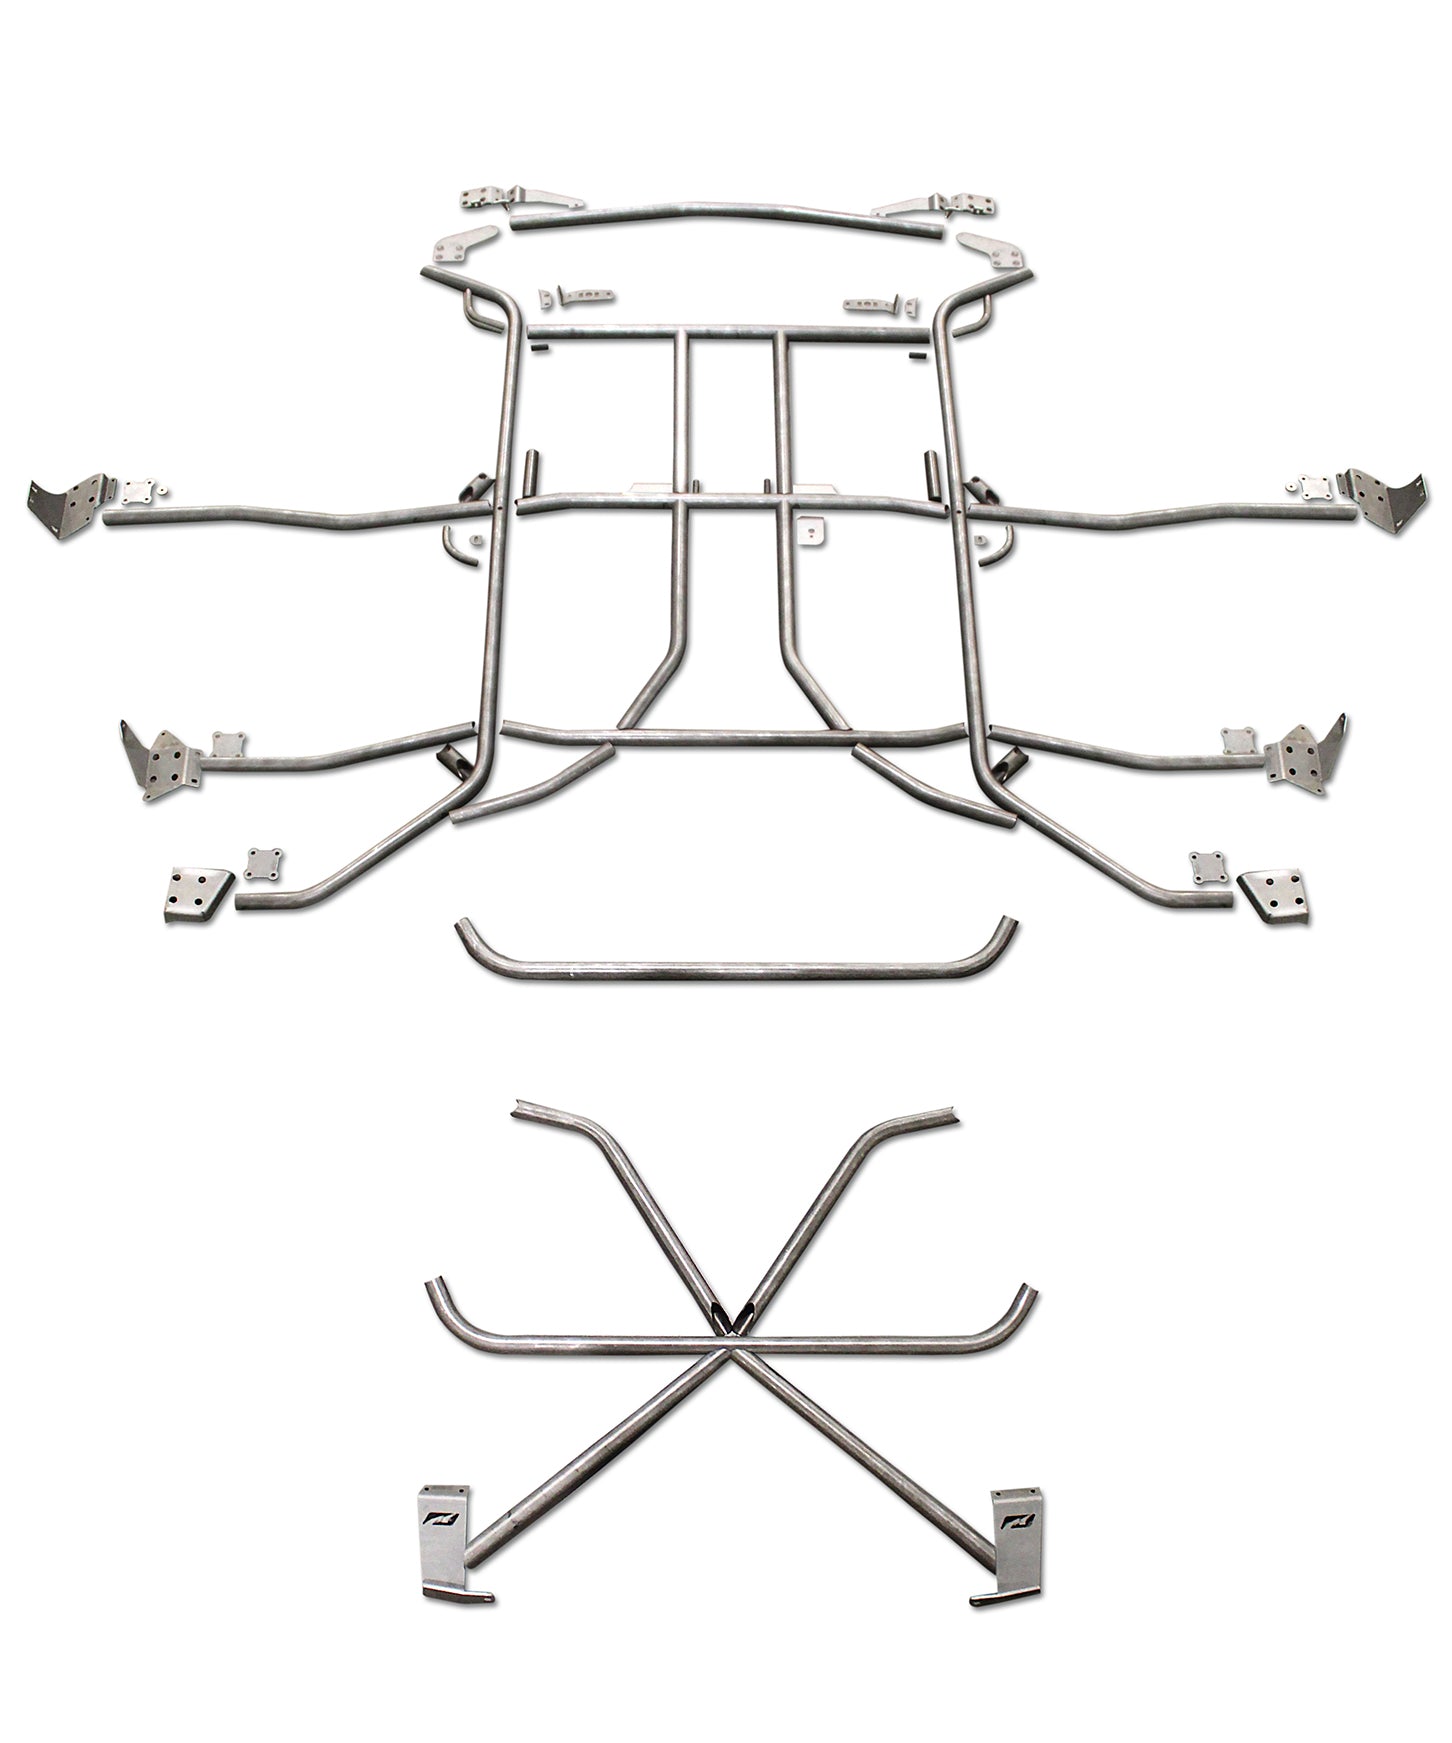 Jeep Wrangler Roll Cage, Jeep JK Full Roll Cage Kit